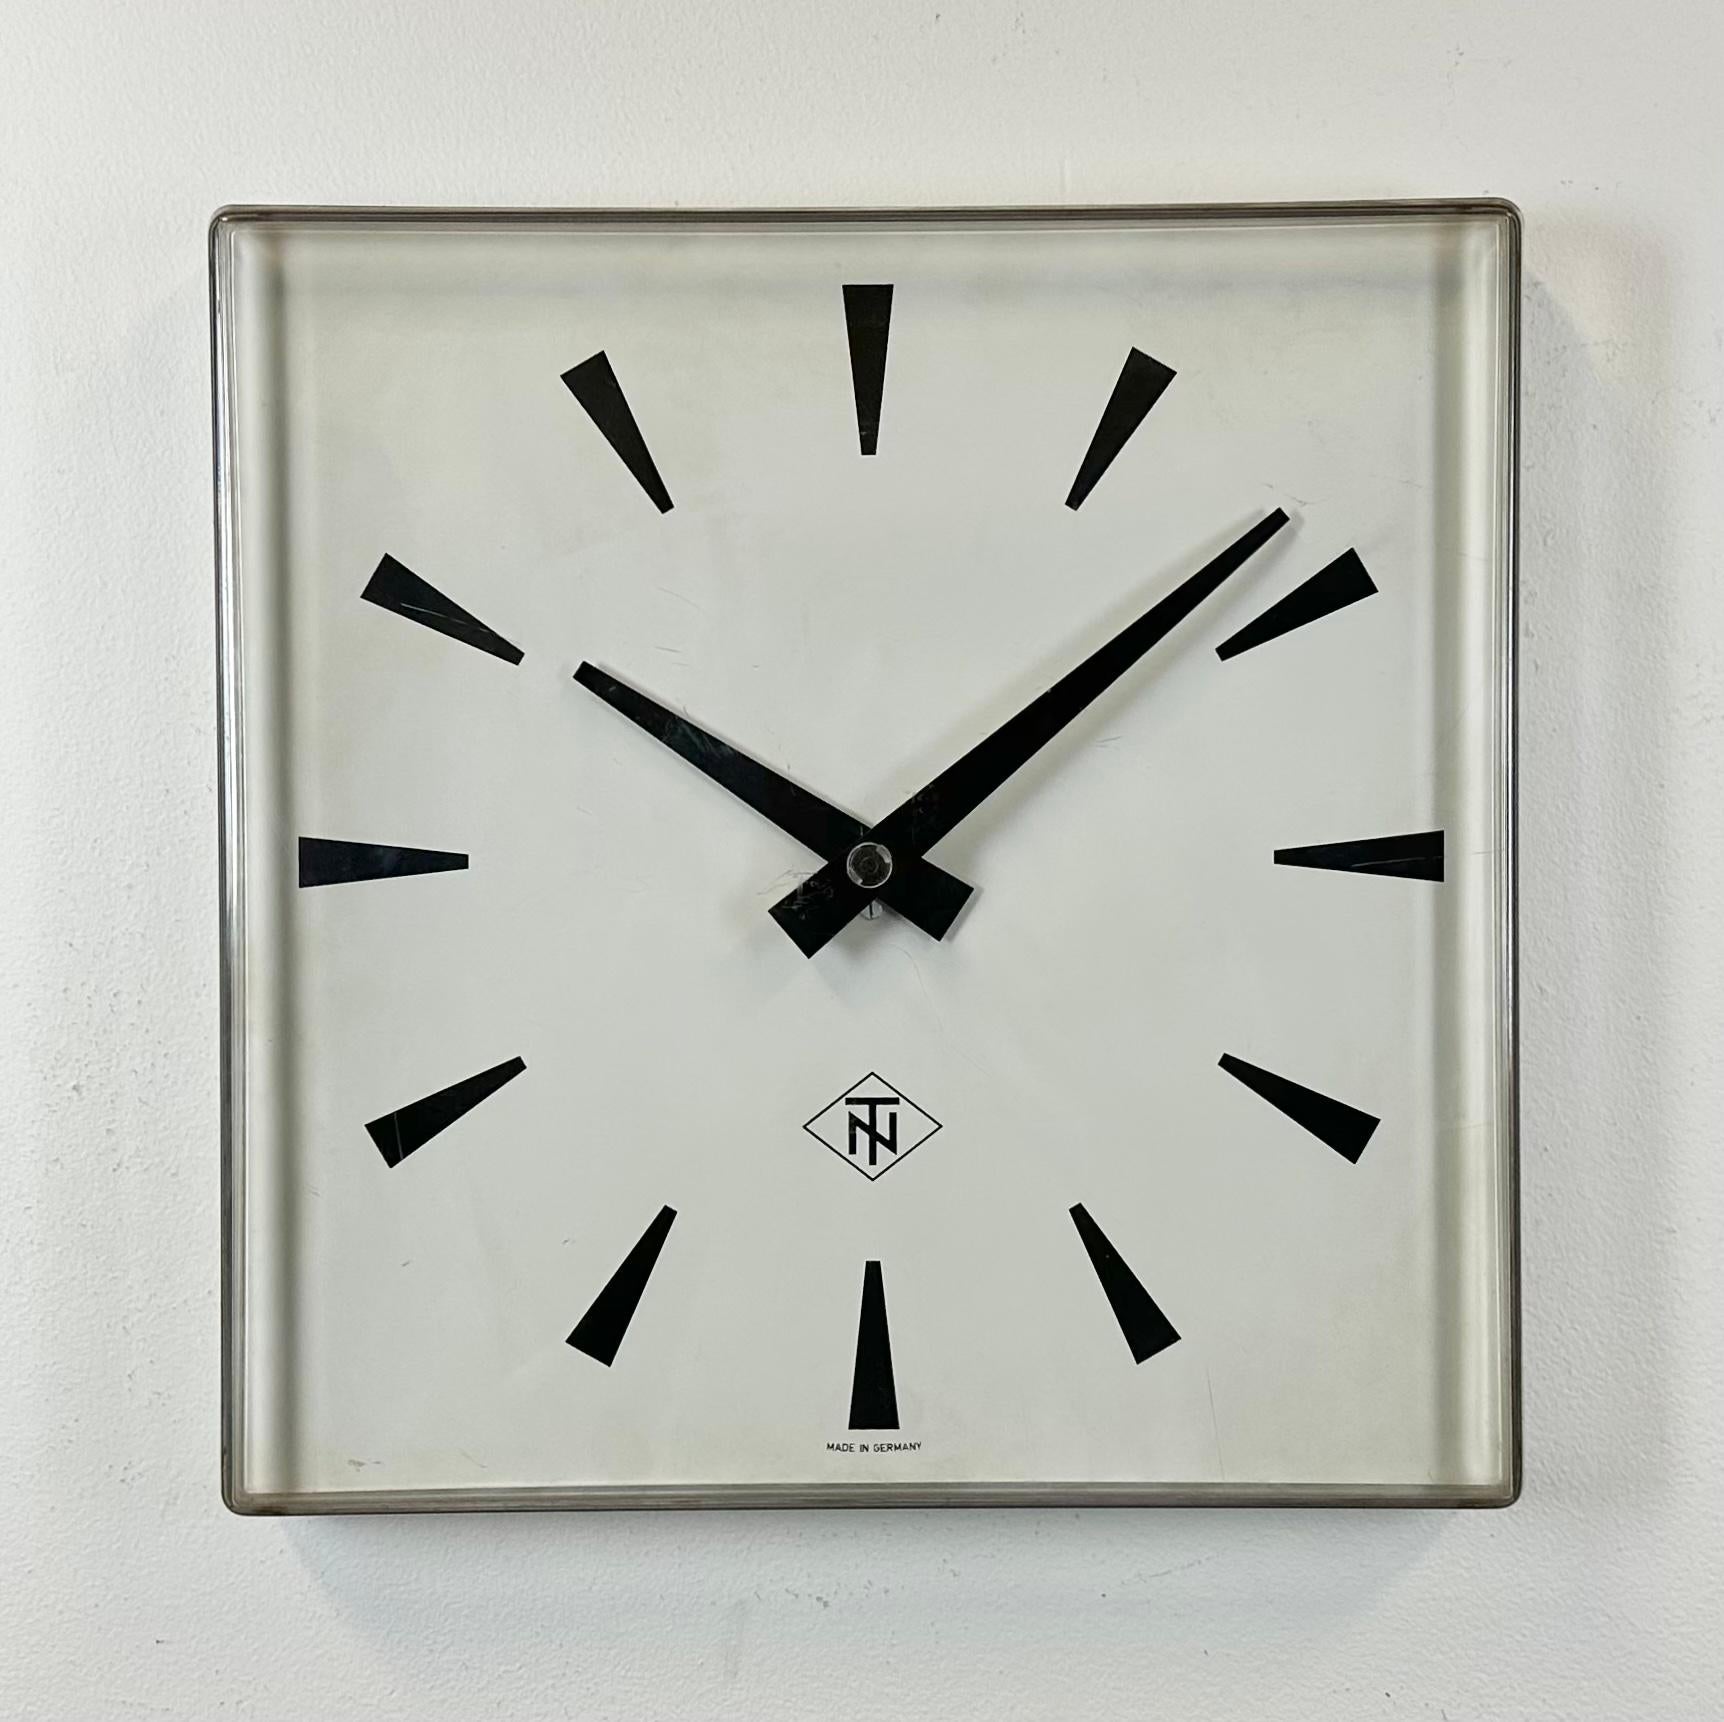 Vintage wall clock produced by TN “Telefonbau und Normalzeit” in Germany during the 1970s. It features a clear convex plexiglass frame, a white metal dial and black aluminium hands. The piece has been converted into a battery-powered clockwork and